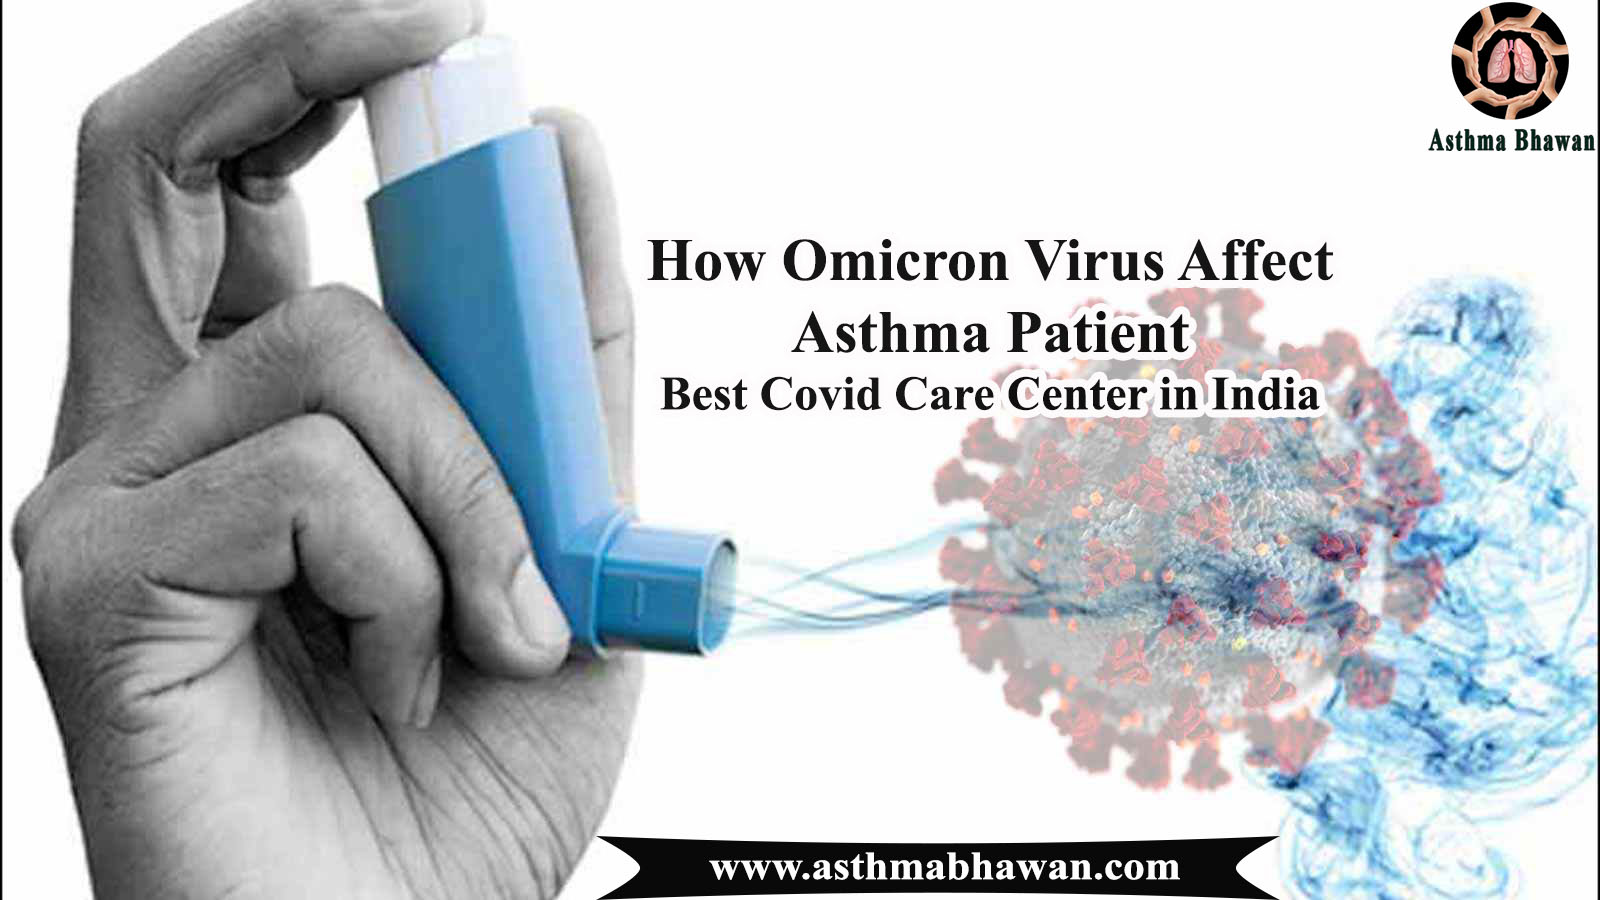 How Omicron Virus affect asthma Patient?